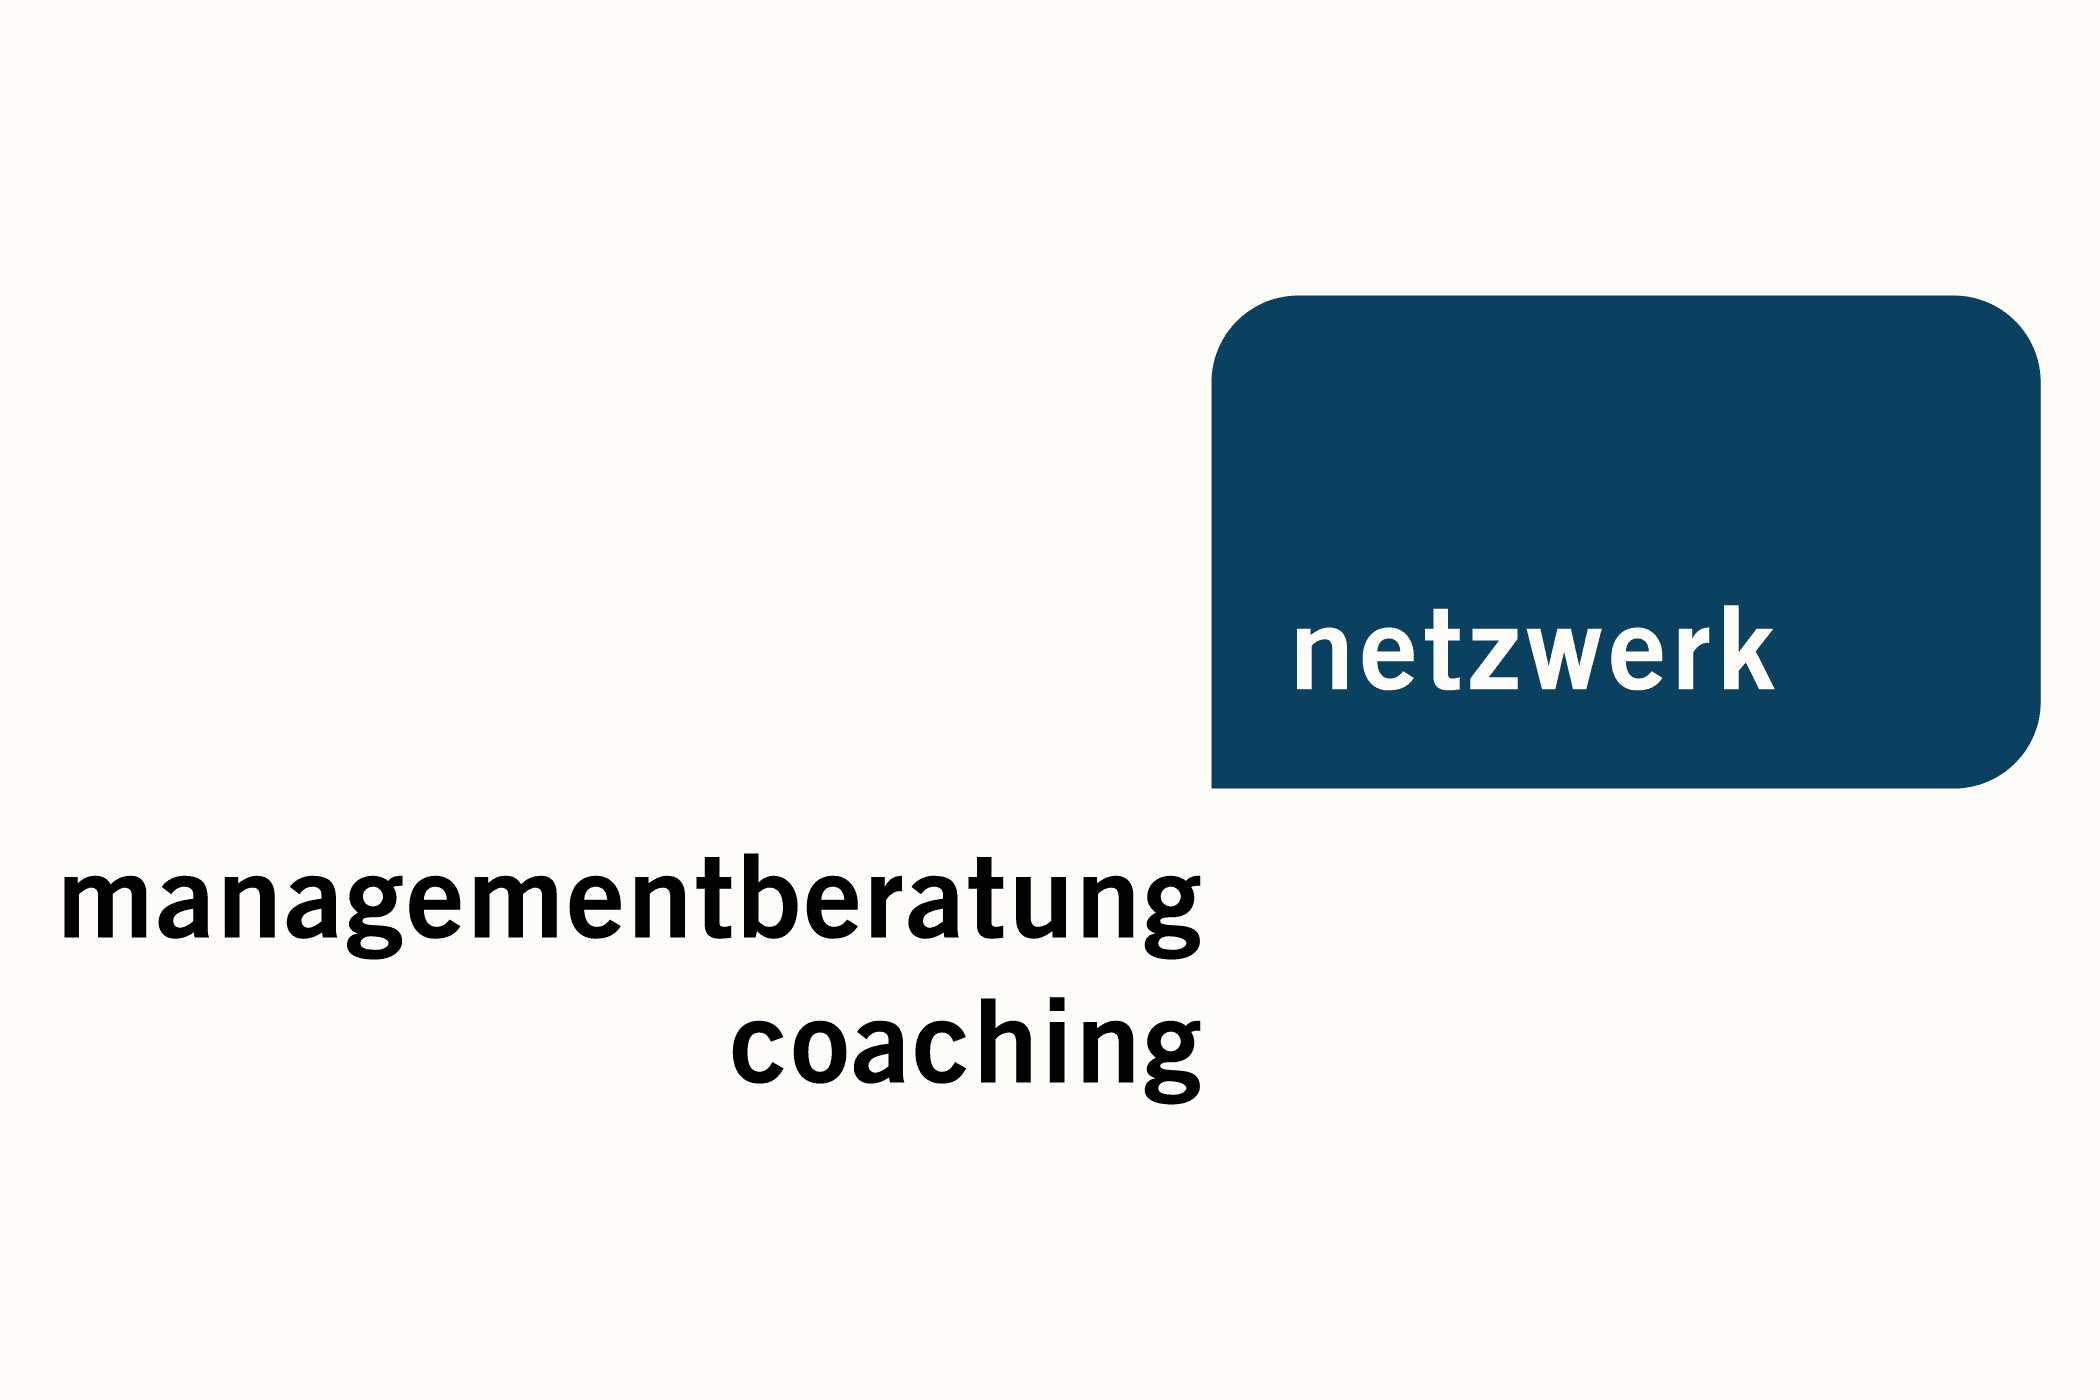 Logo network management consulting | coaching